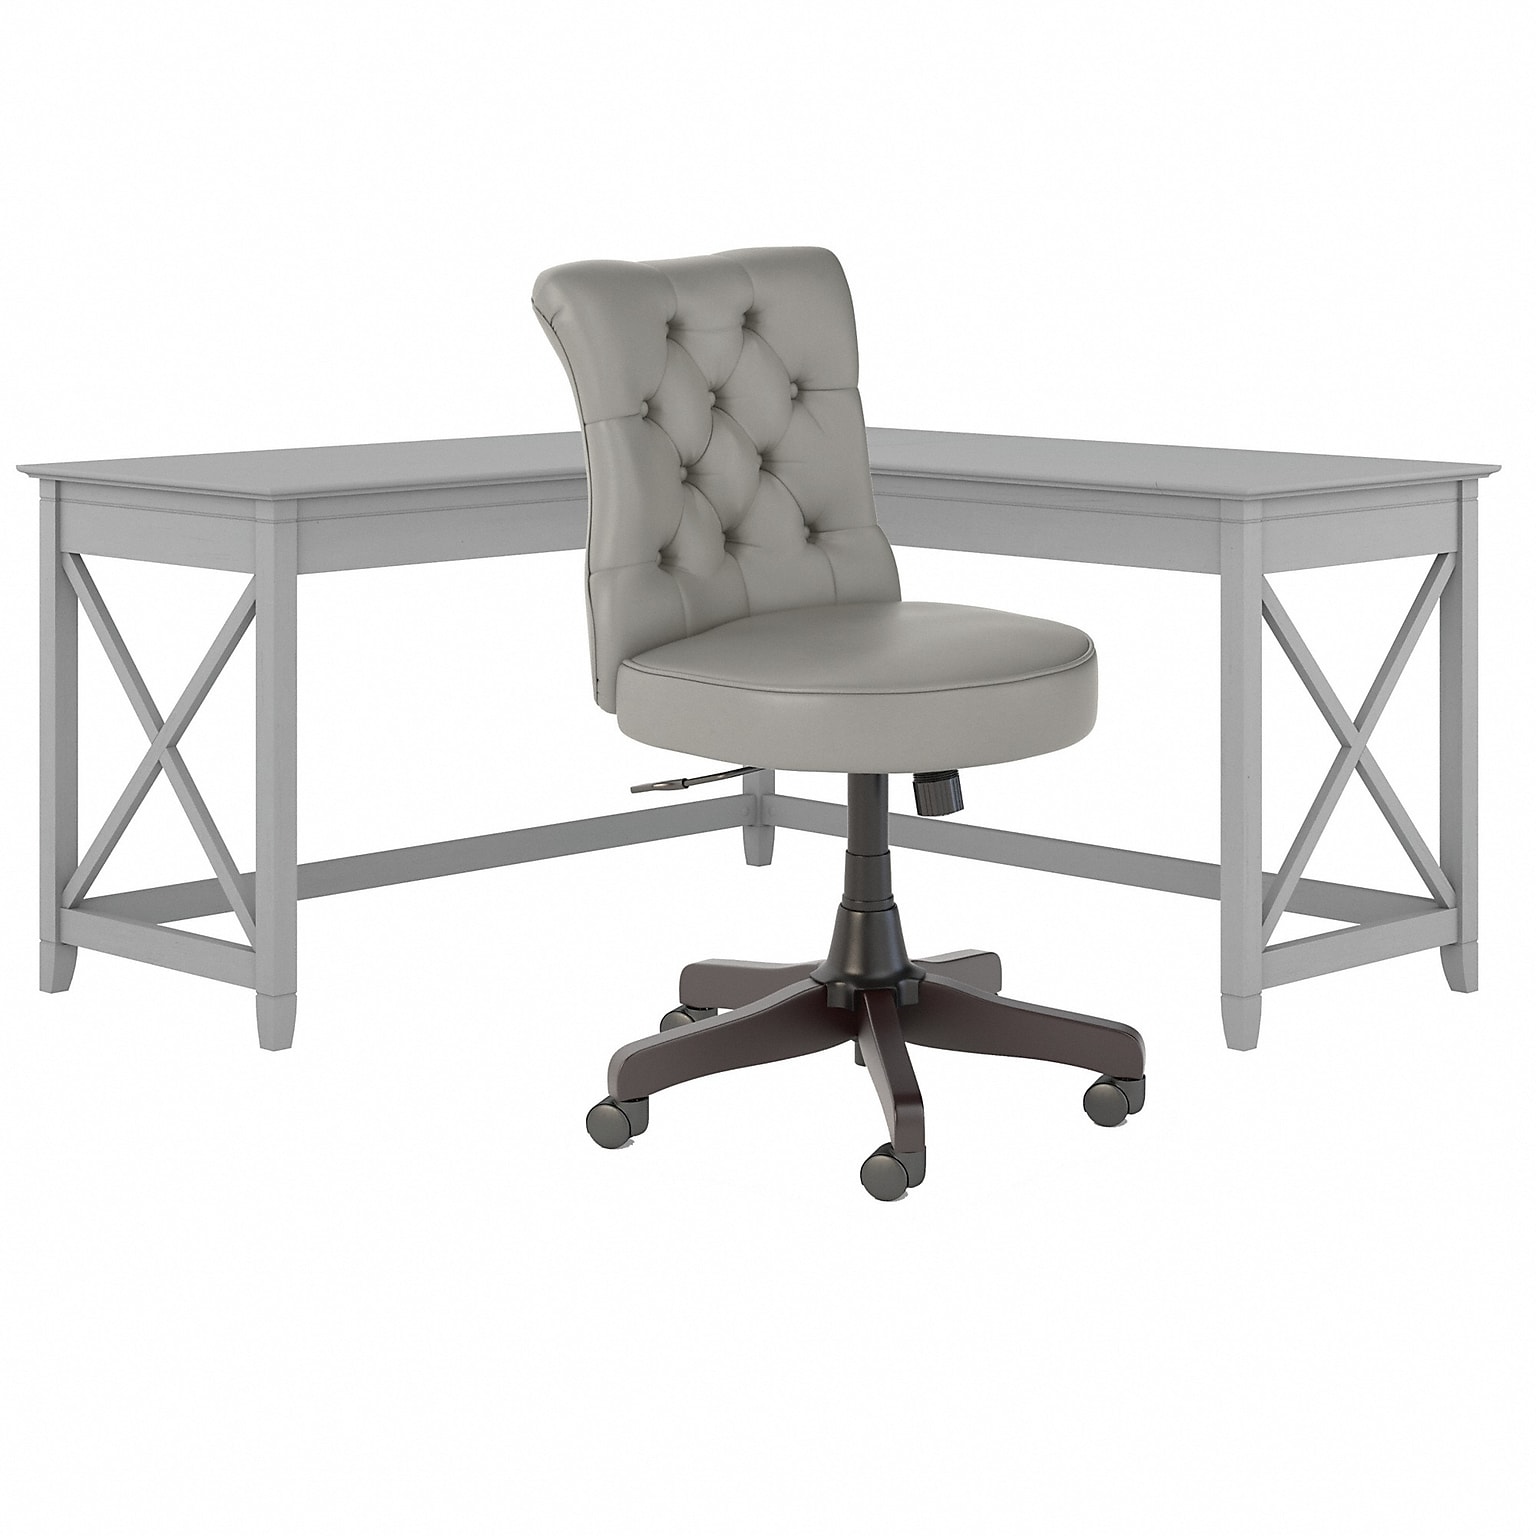 Bush Furniture Key West 60 L-Shaped Desk with Mid-Back Tufted Office Chair, Cape Cod Gray (KWS045CG)